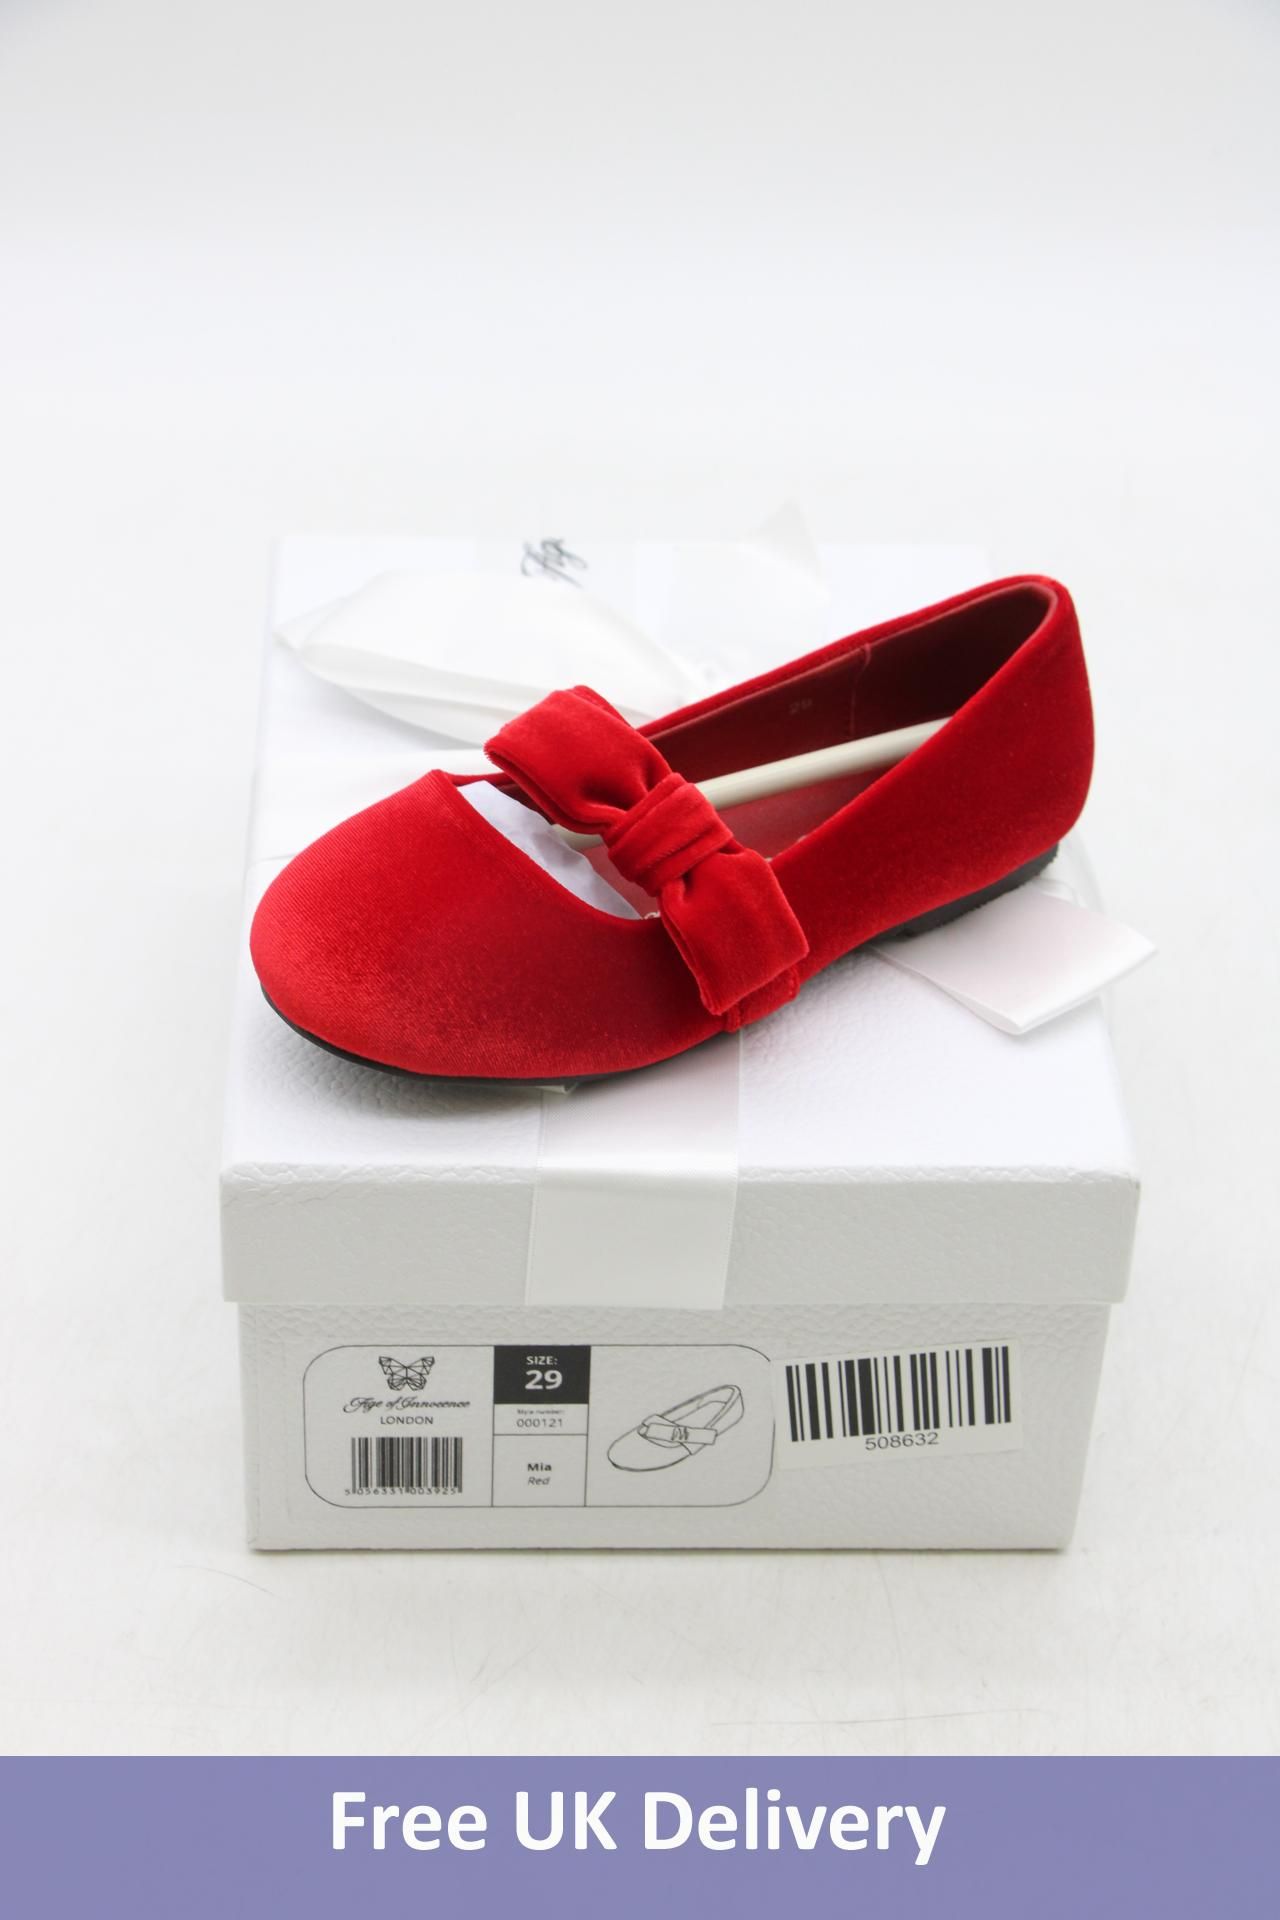 Age of Innocence Kids Mia Ballet Flats, Red, Size 29